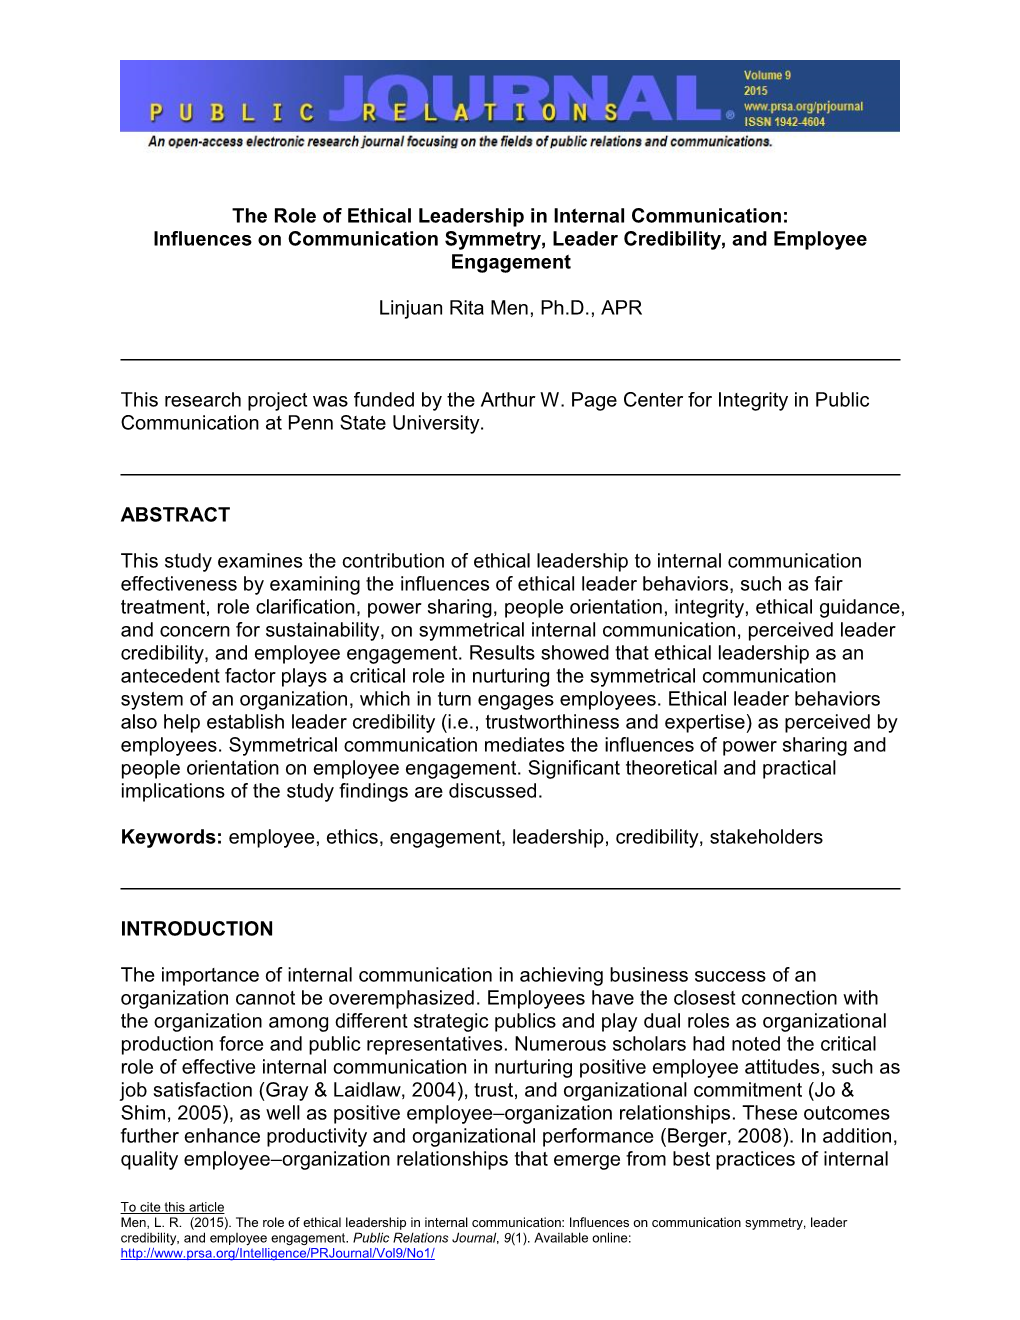 The Role of Ethical Leadership in Internal Communication: Influences on Communication Symmetry, Leader Credibility, and Employee Engagement